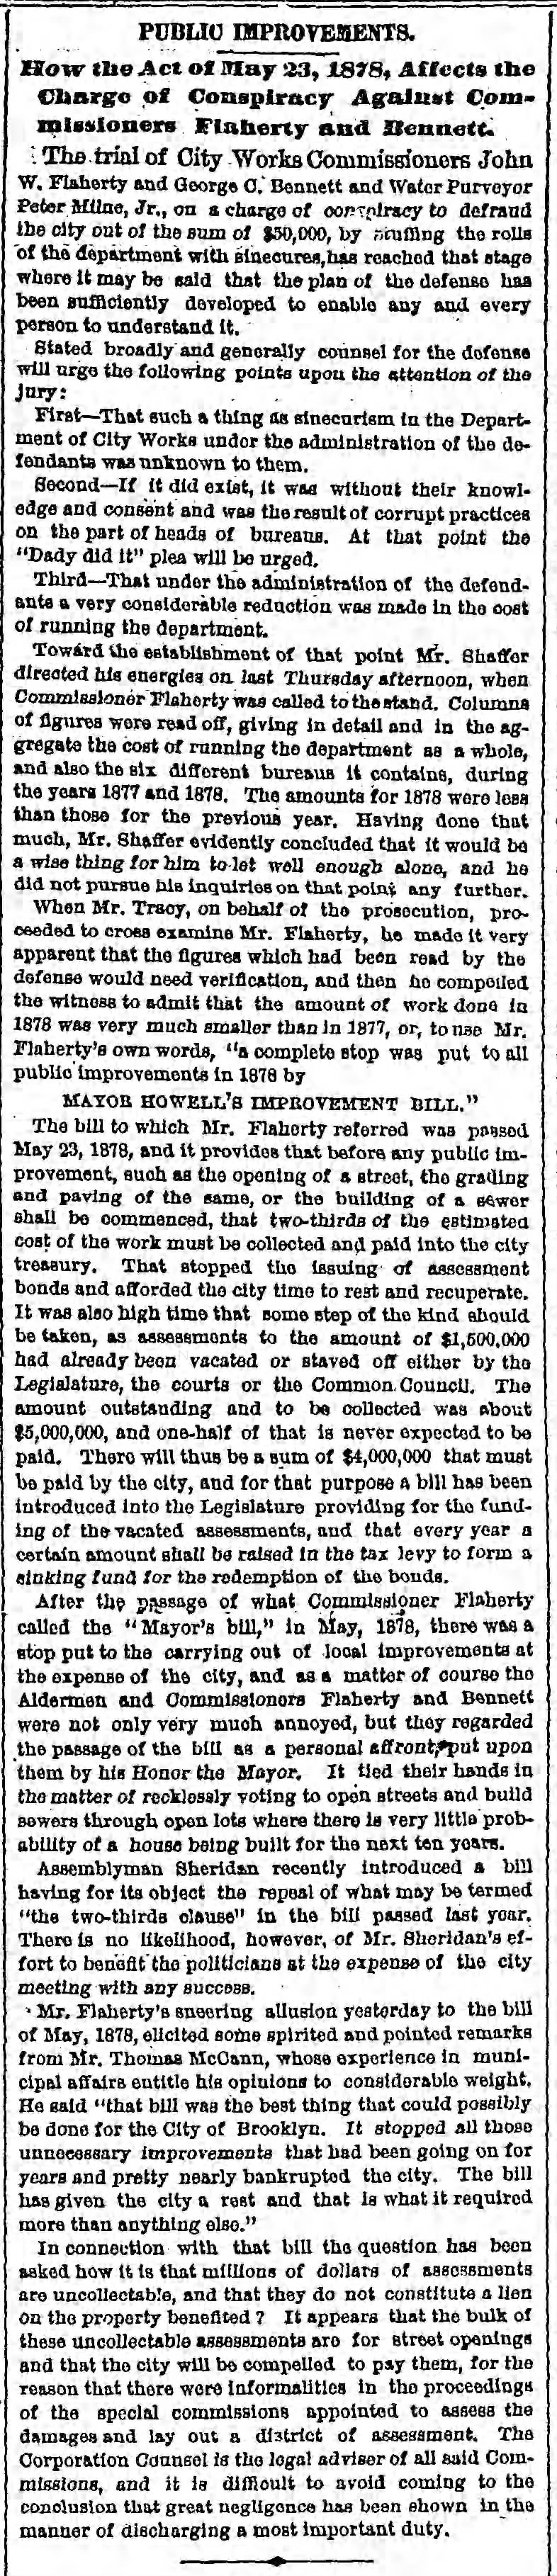 Tuesday, April 29, 1879 - Page 2